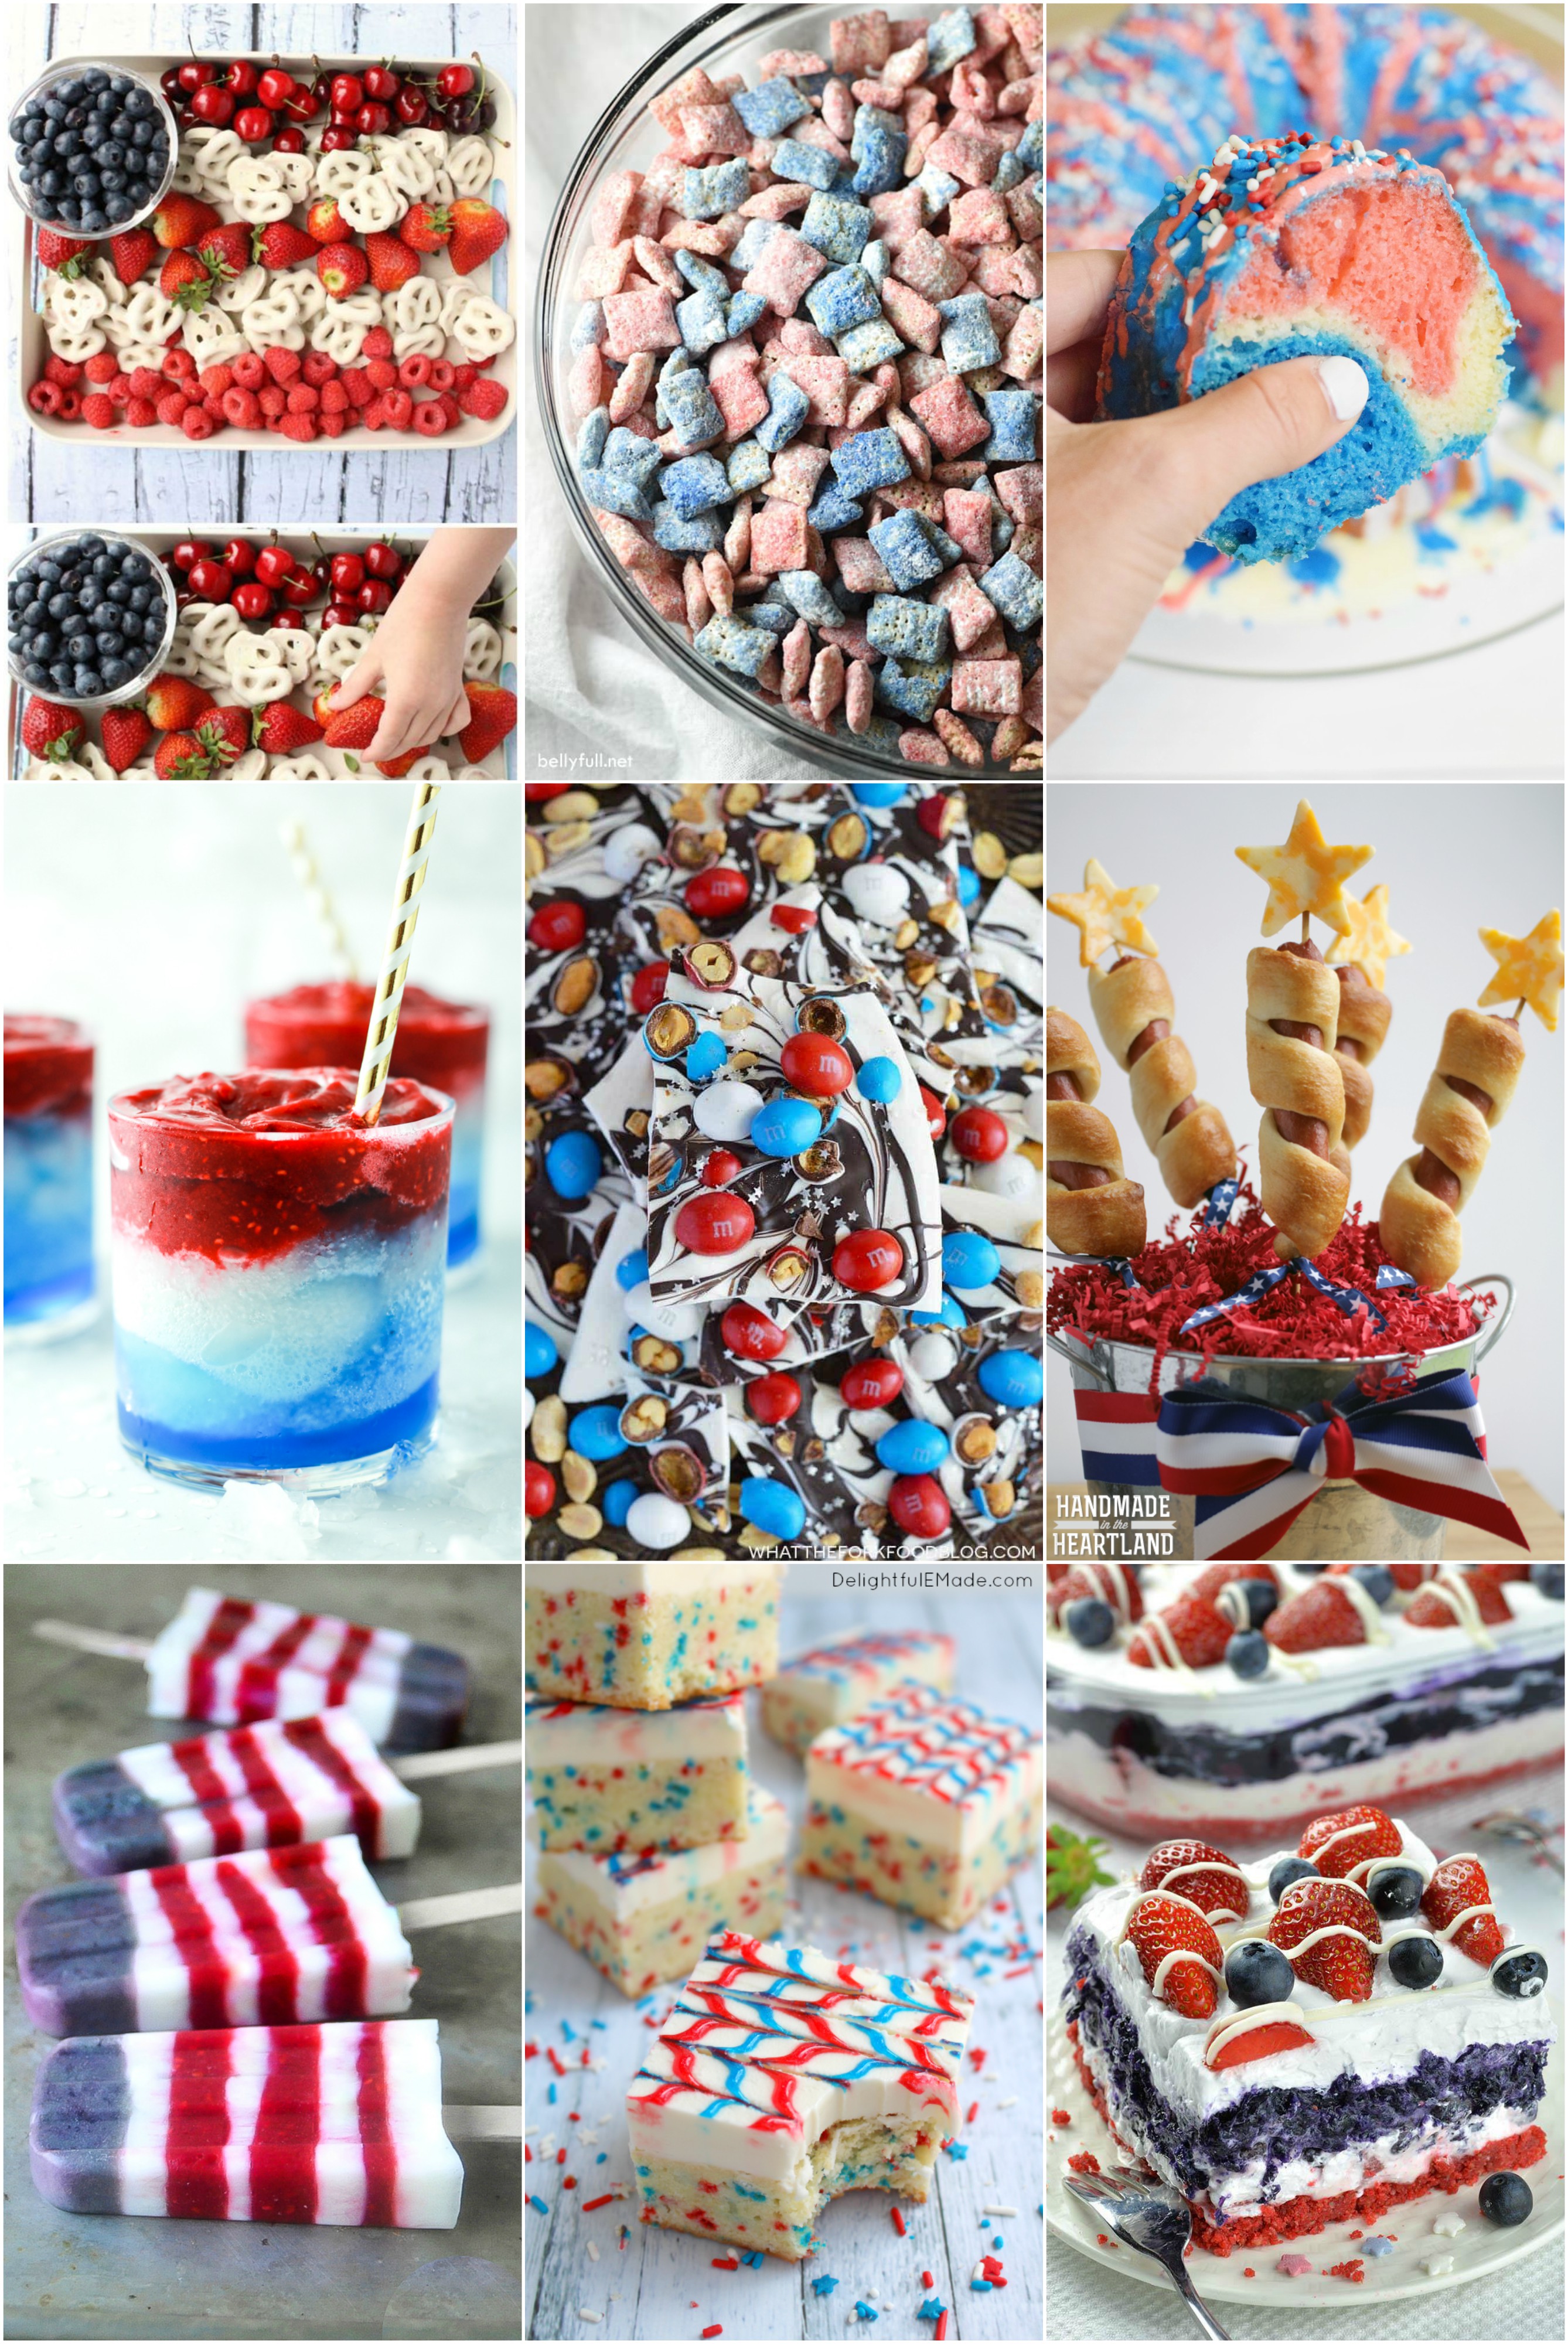 The Best Red, White + Blue Recipes For Your Patriotic Party - #4thOfJuly #Patriotic #Dessert #SummerParty #RedWhiteAndBlue